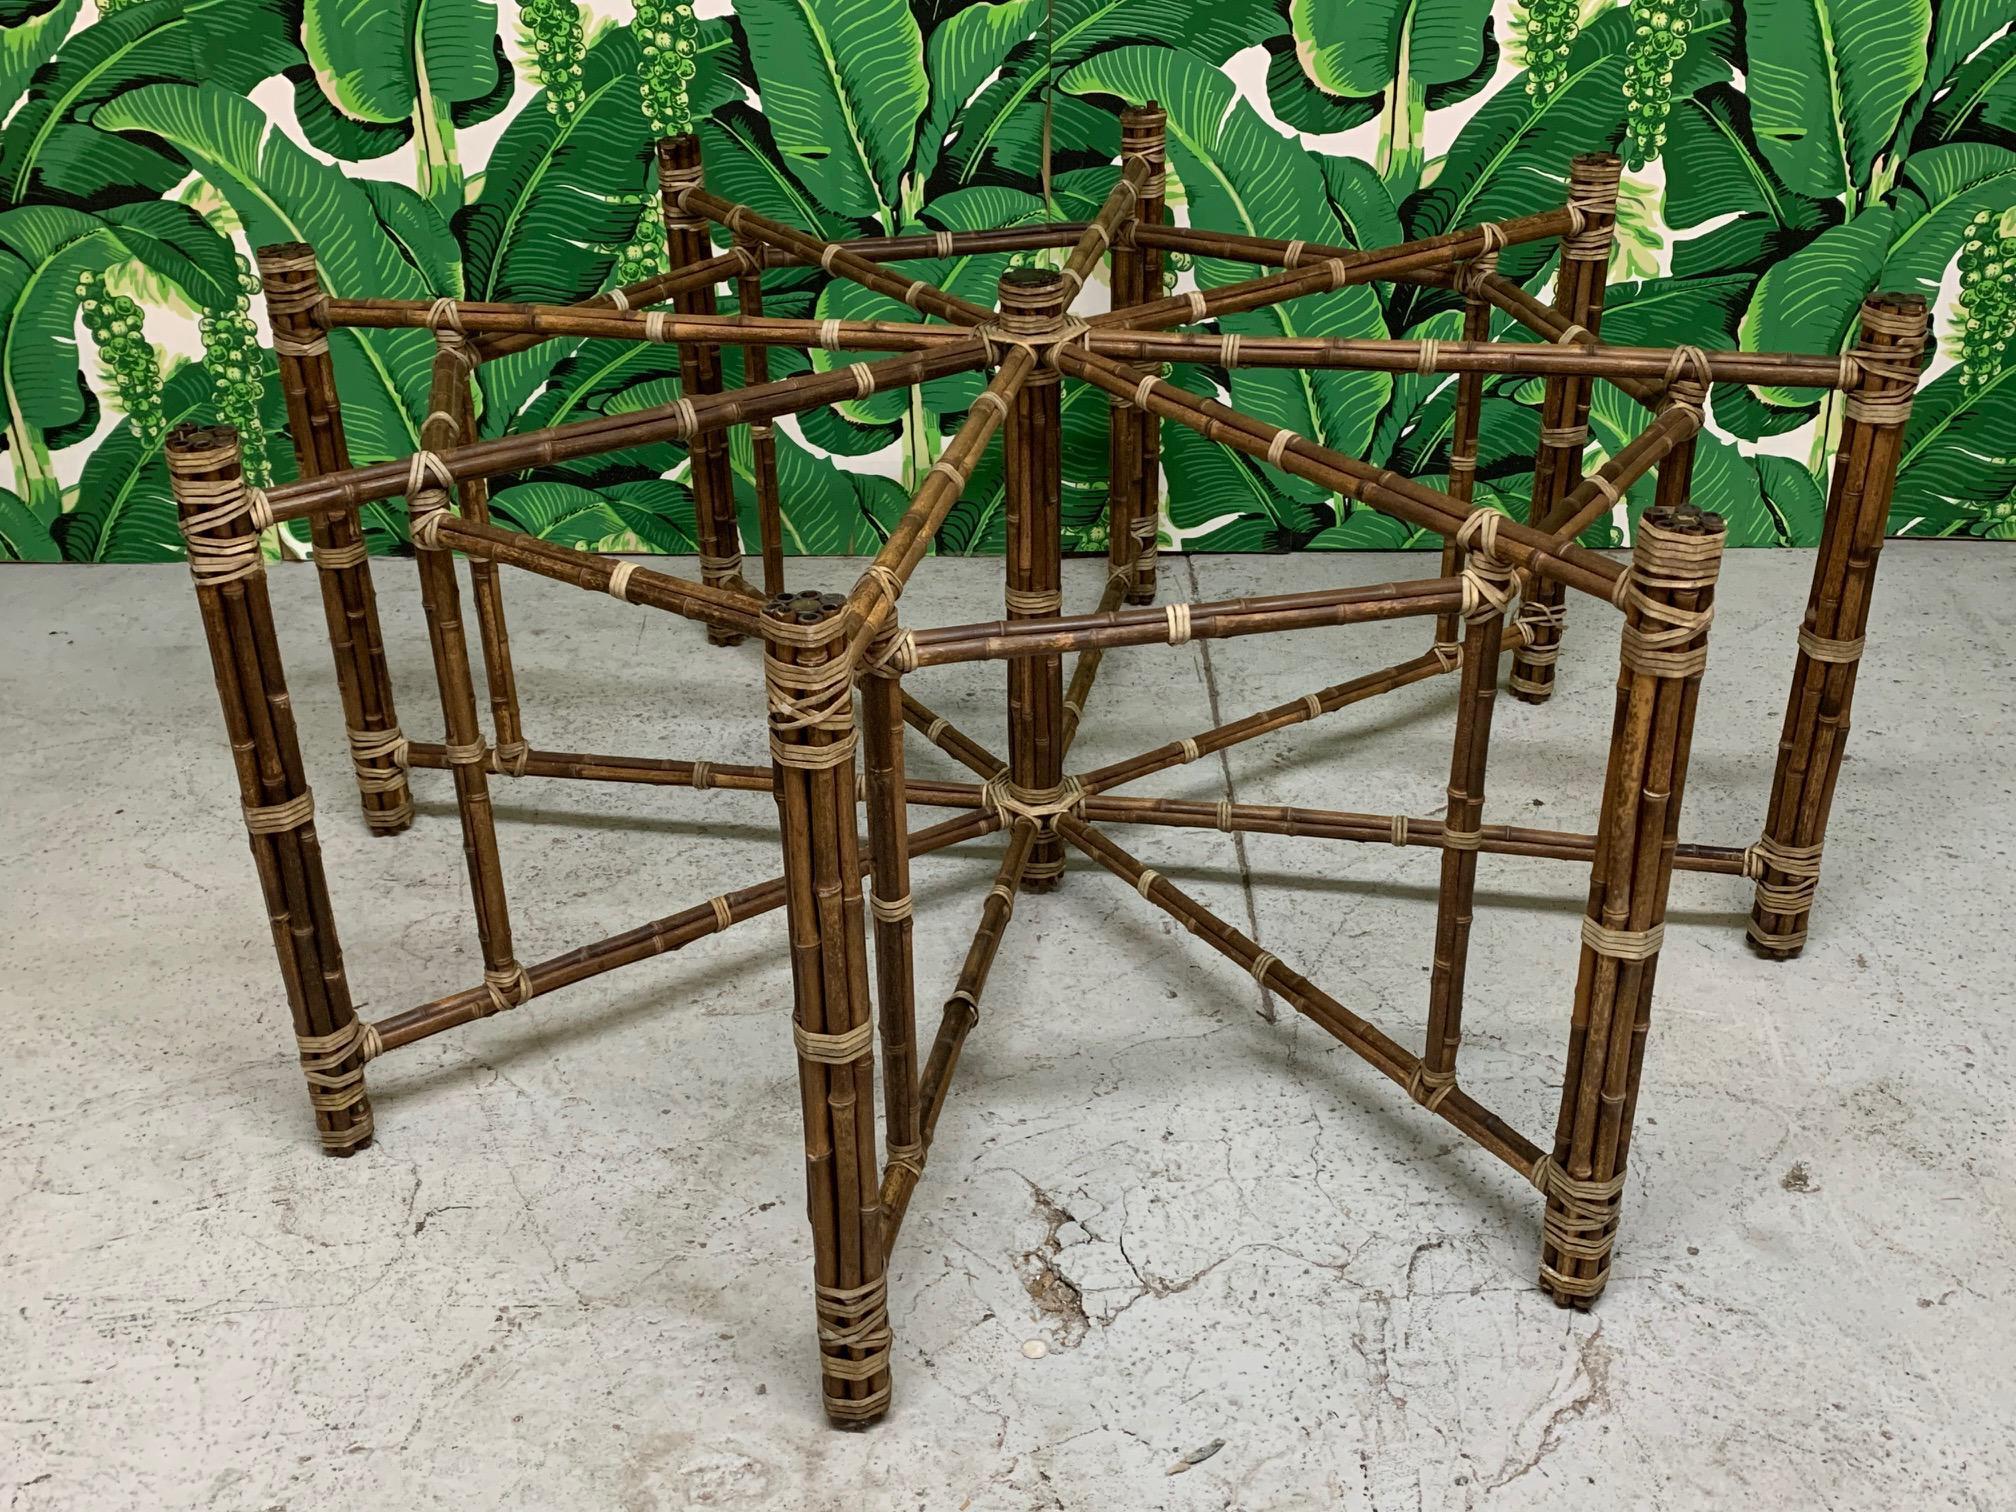 Large octagonal dining table base by McGuire features an iron frame wrapped in bamboo and lashed with leather rawhide laces. Base measures 66